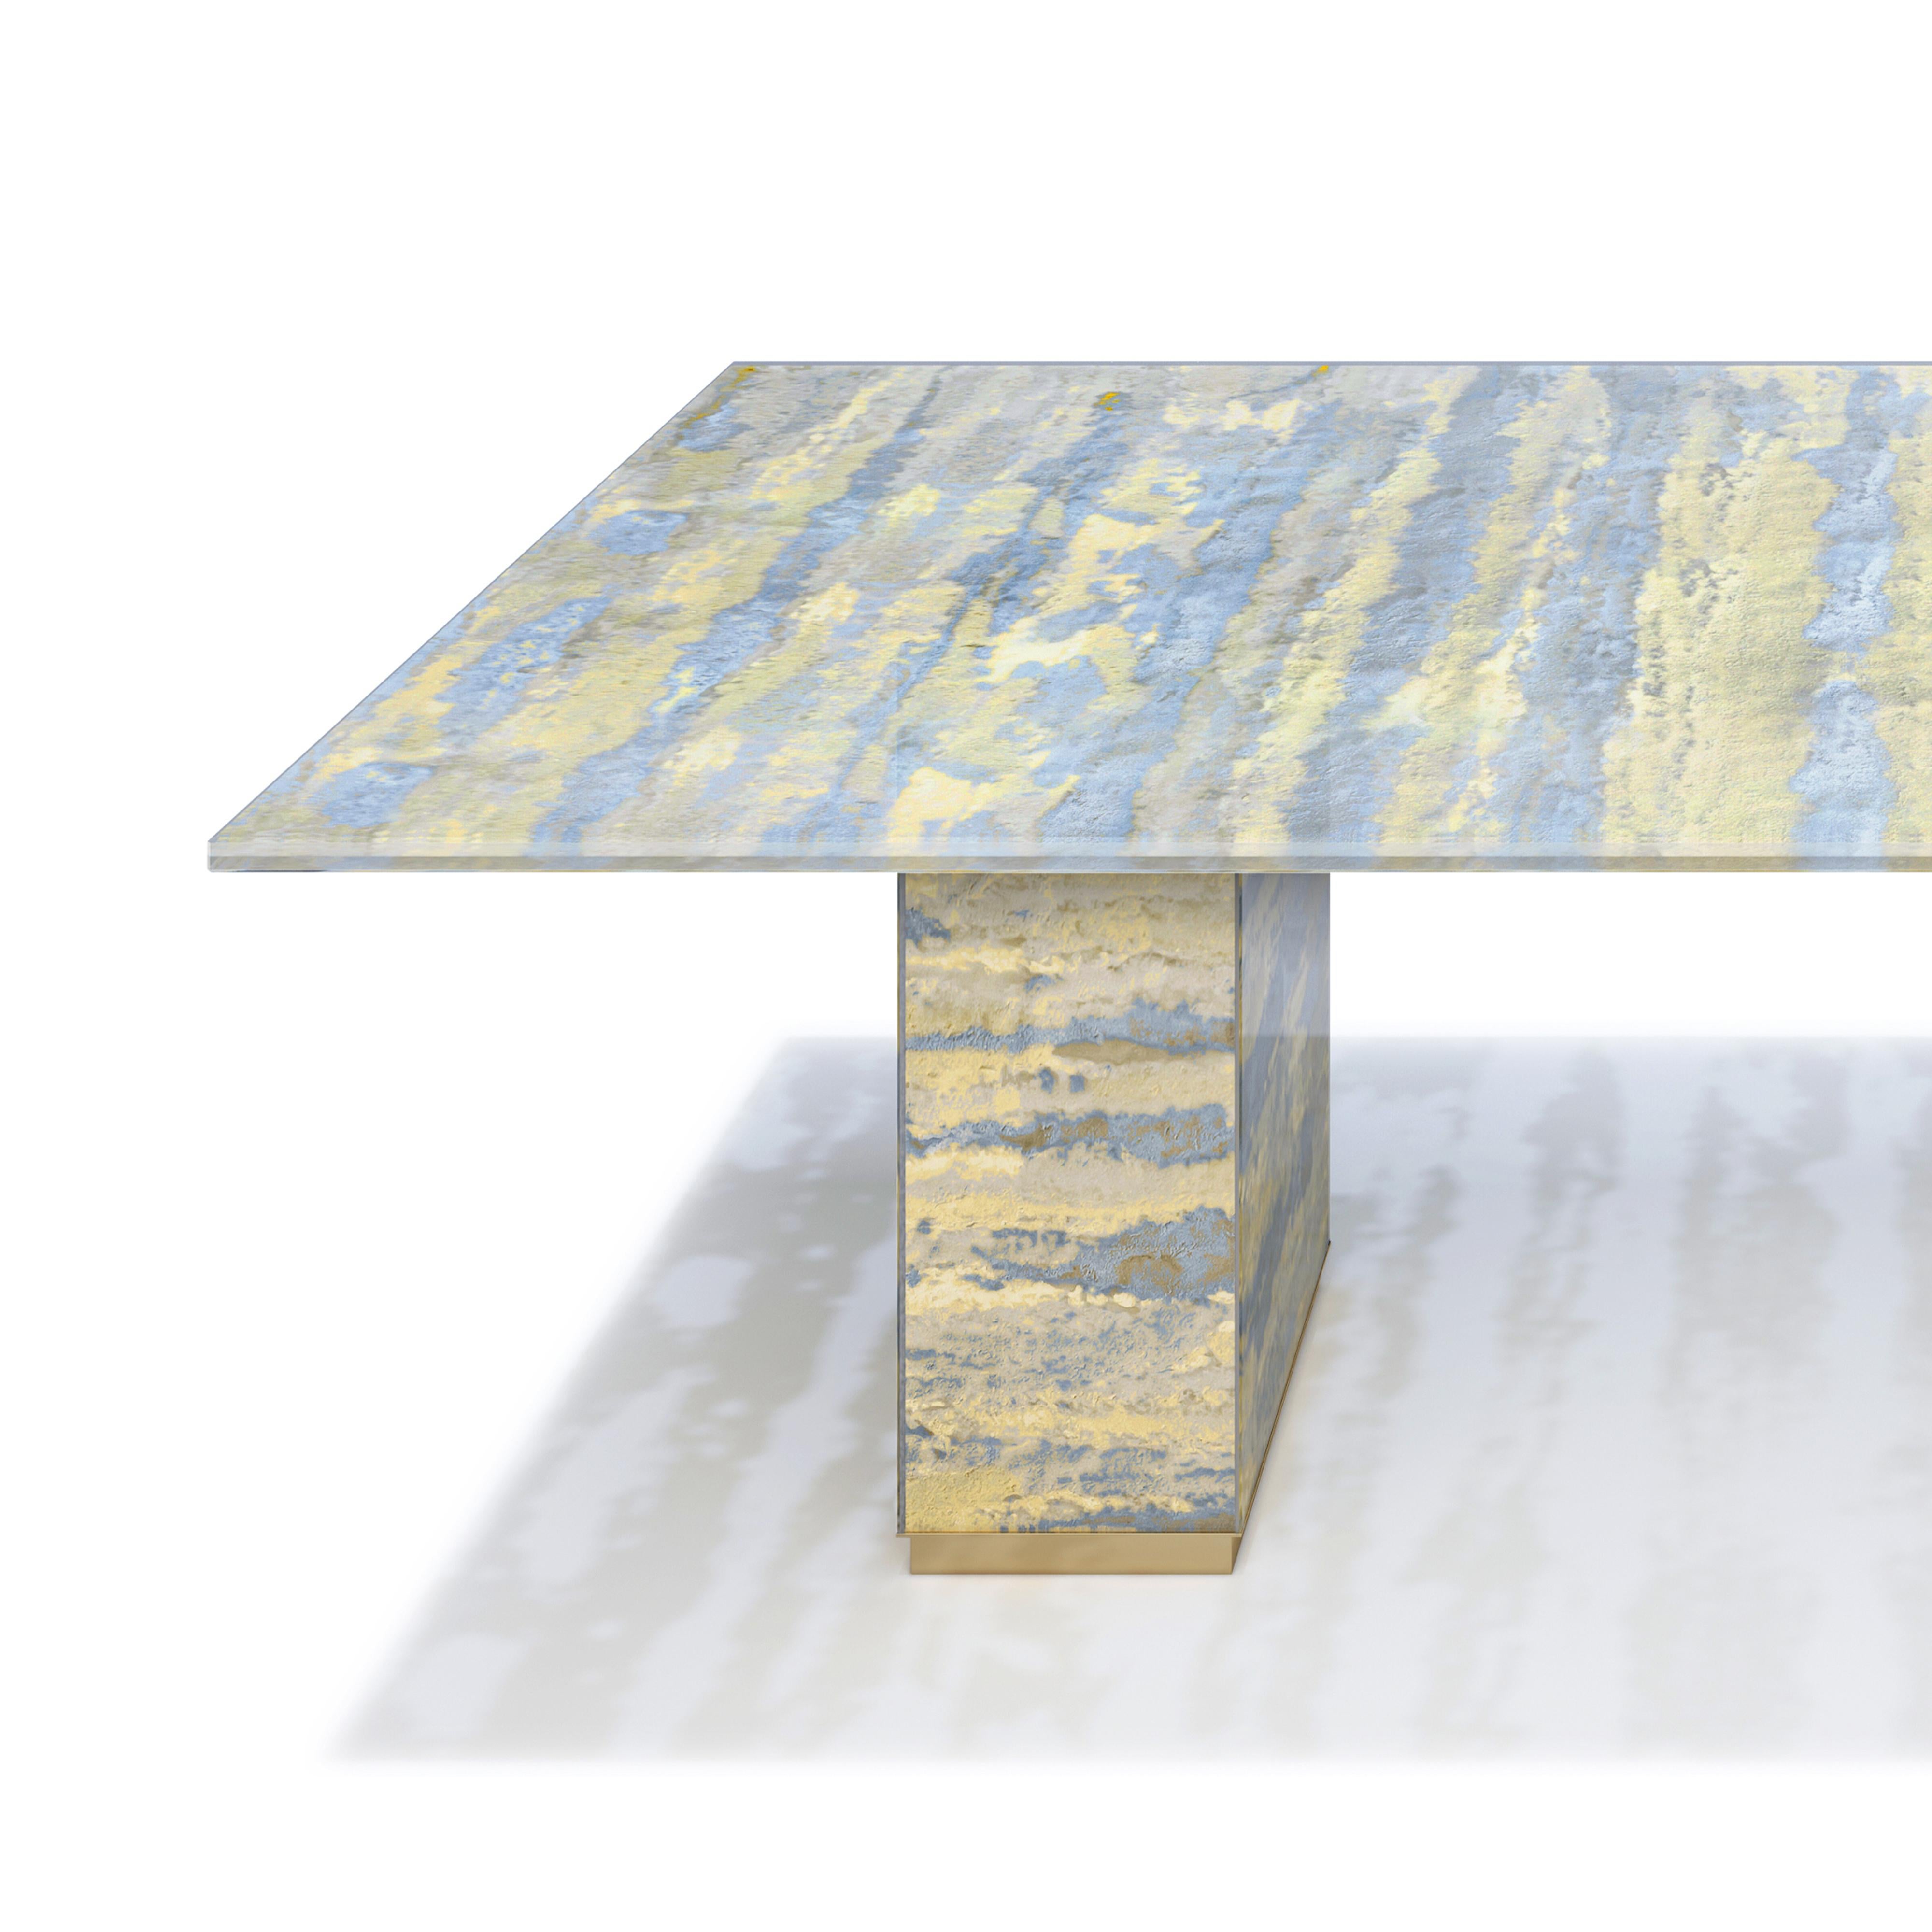 Lillian Gorbachincky's limited edition Rodeo dining table featuring fabric laminated glass and bronze designed and fabricated by Lillian Gorbachincky Atelier.

Overall dimensions: 96